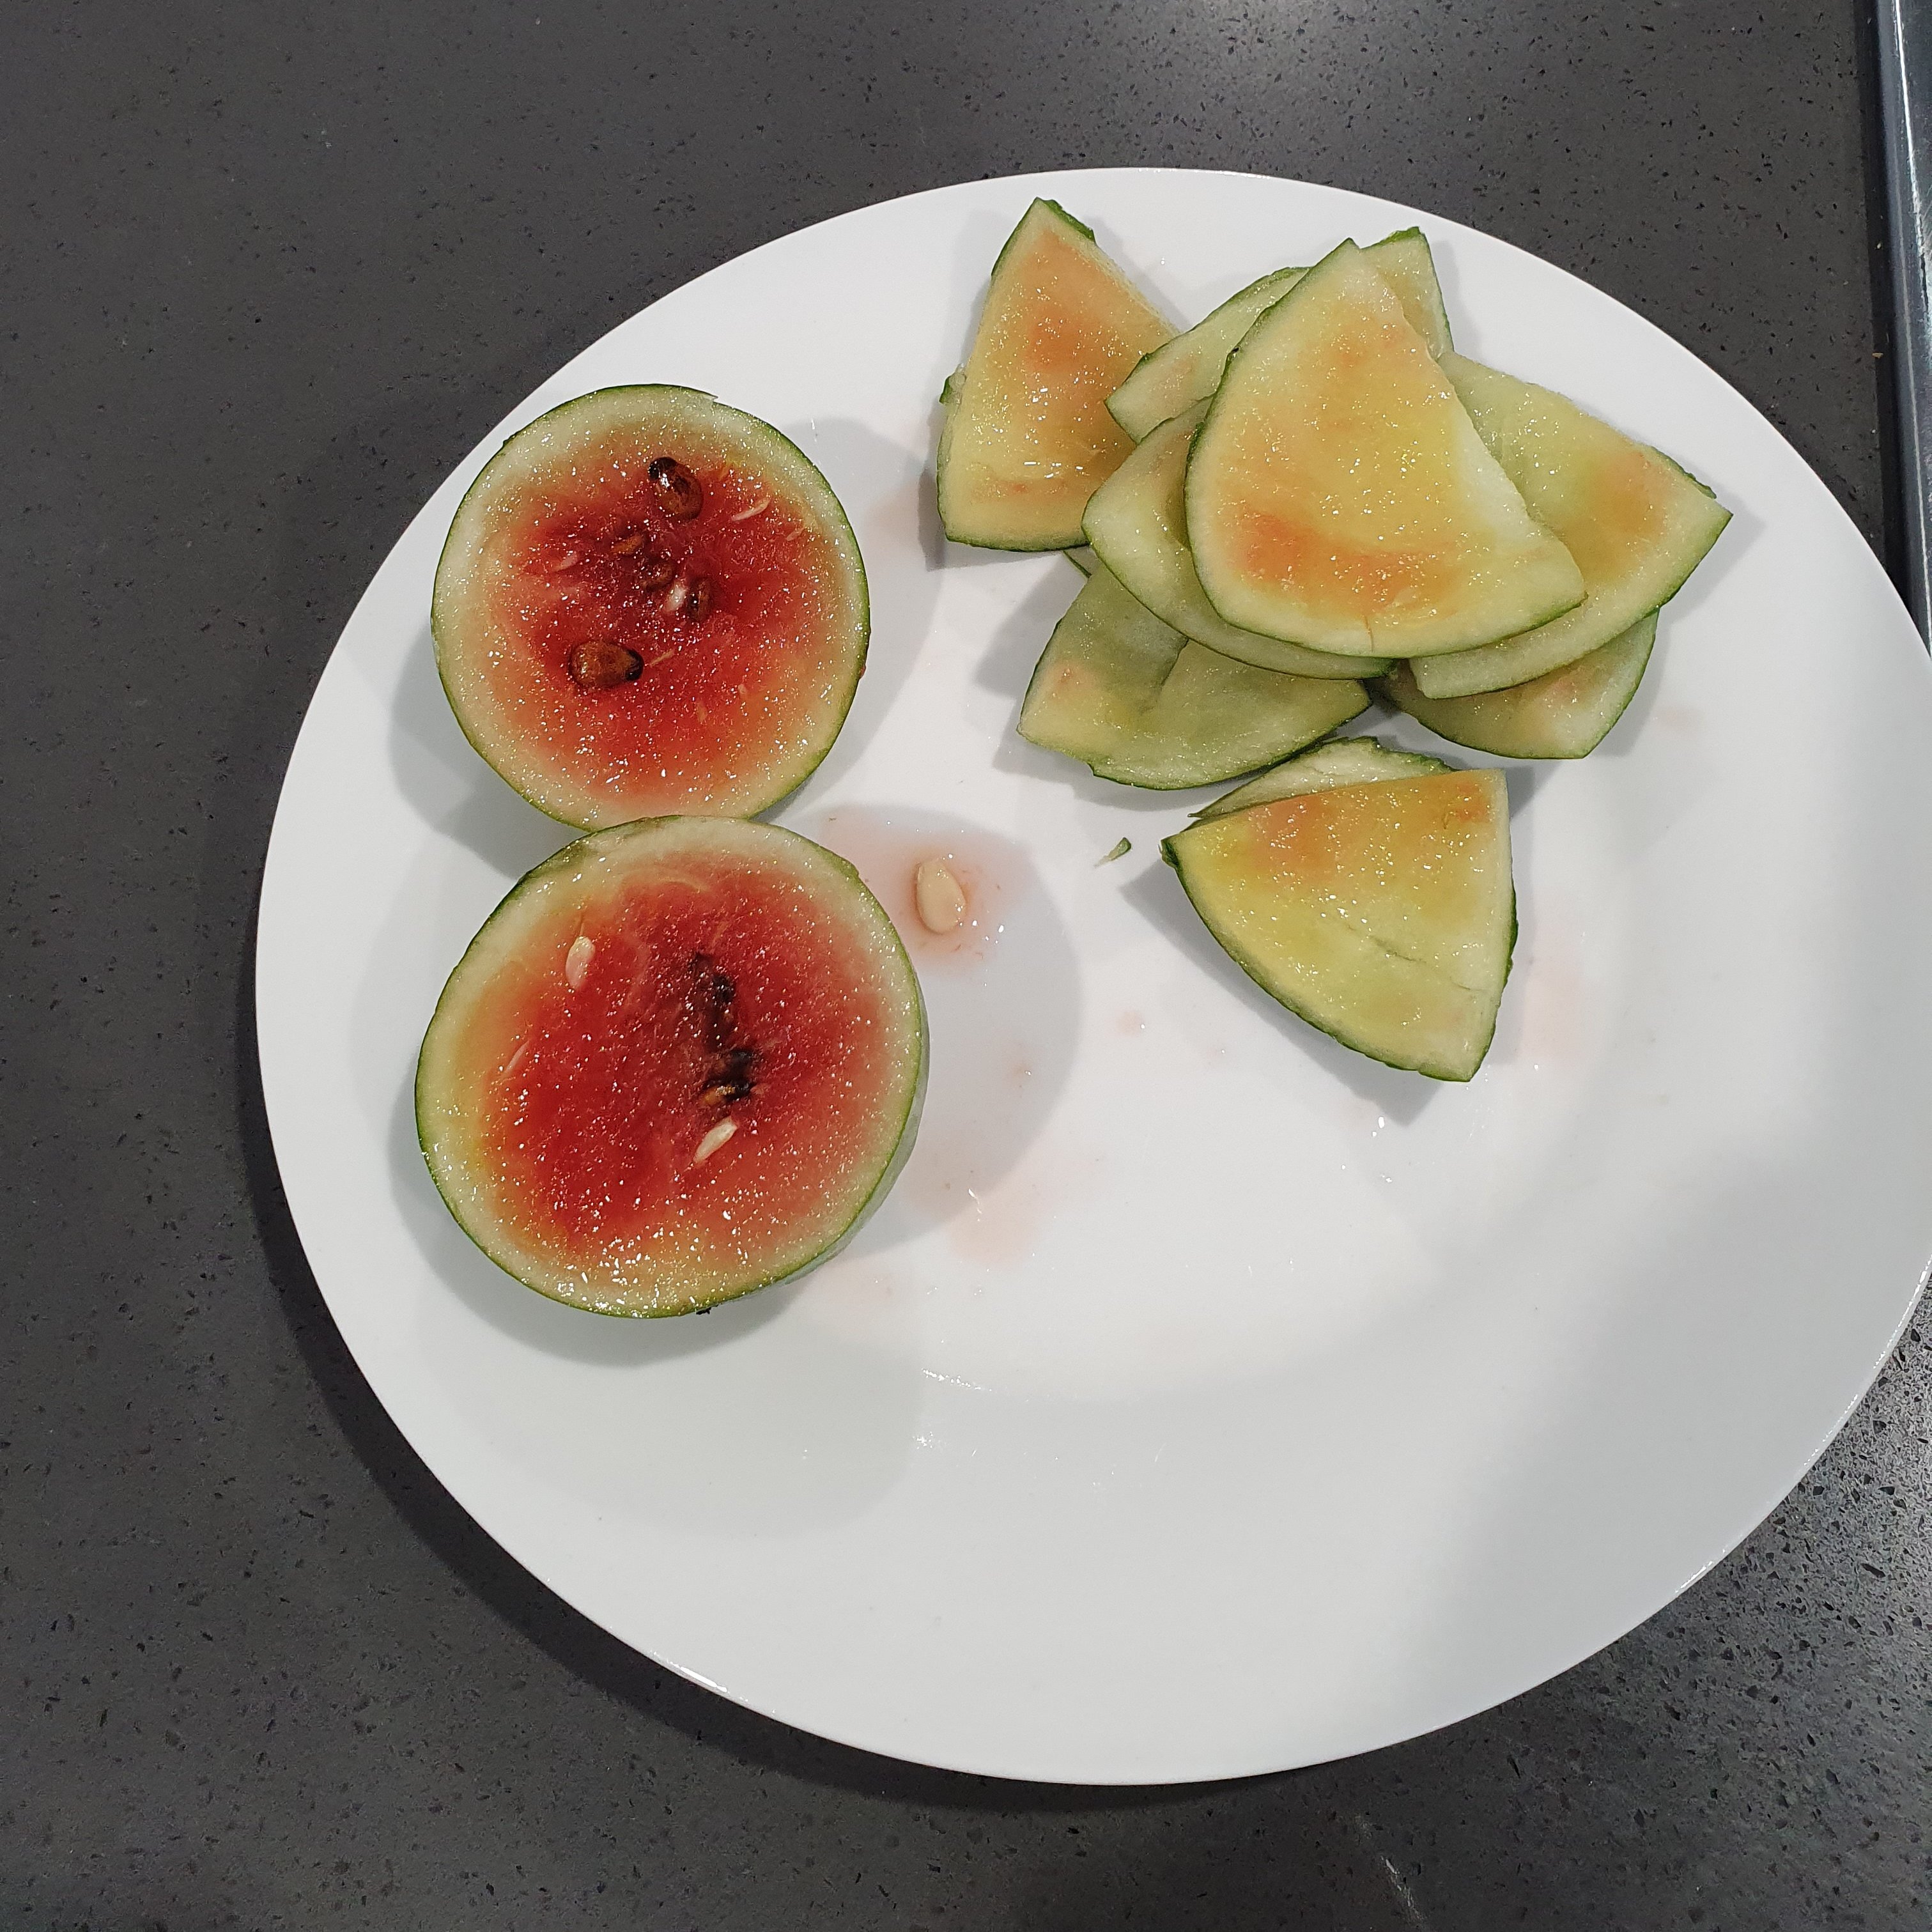 Photo of a really small watermelon that has been cut in half, showing inside is red and ripe